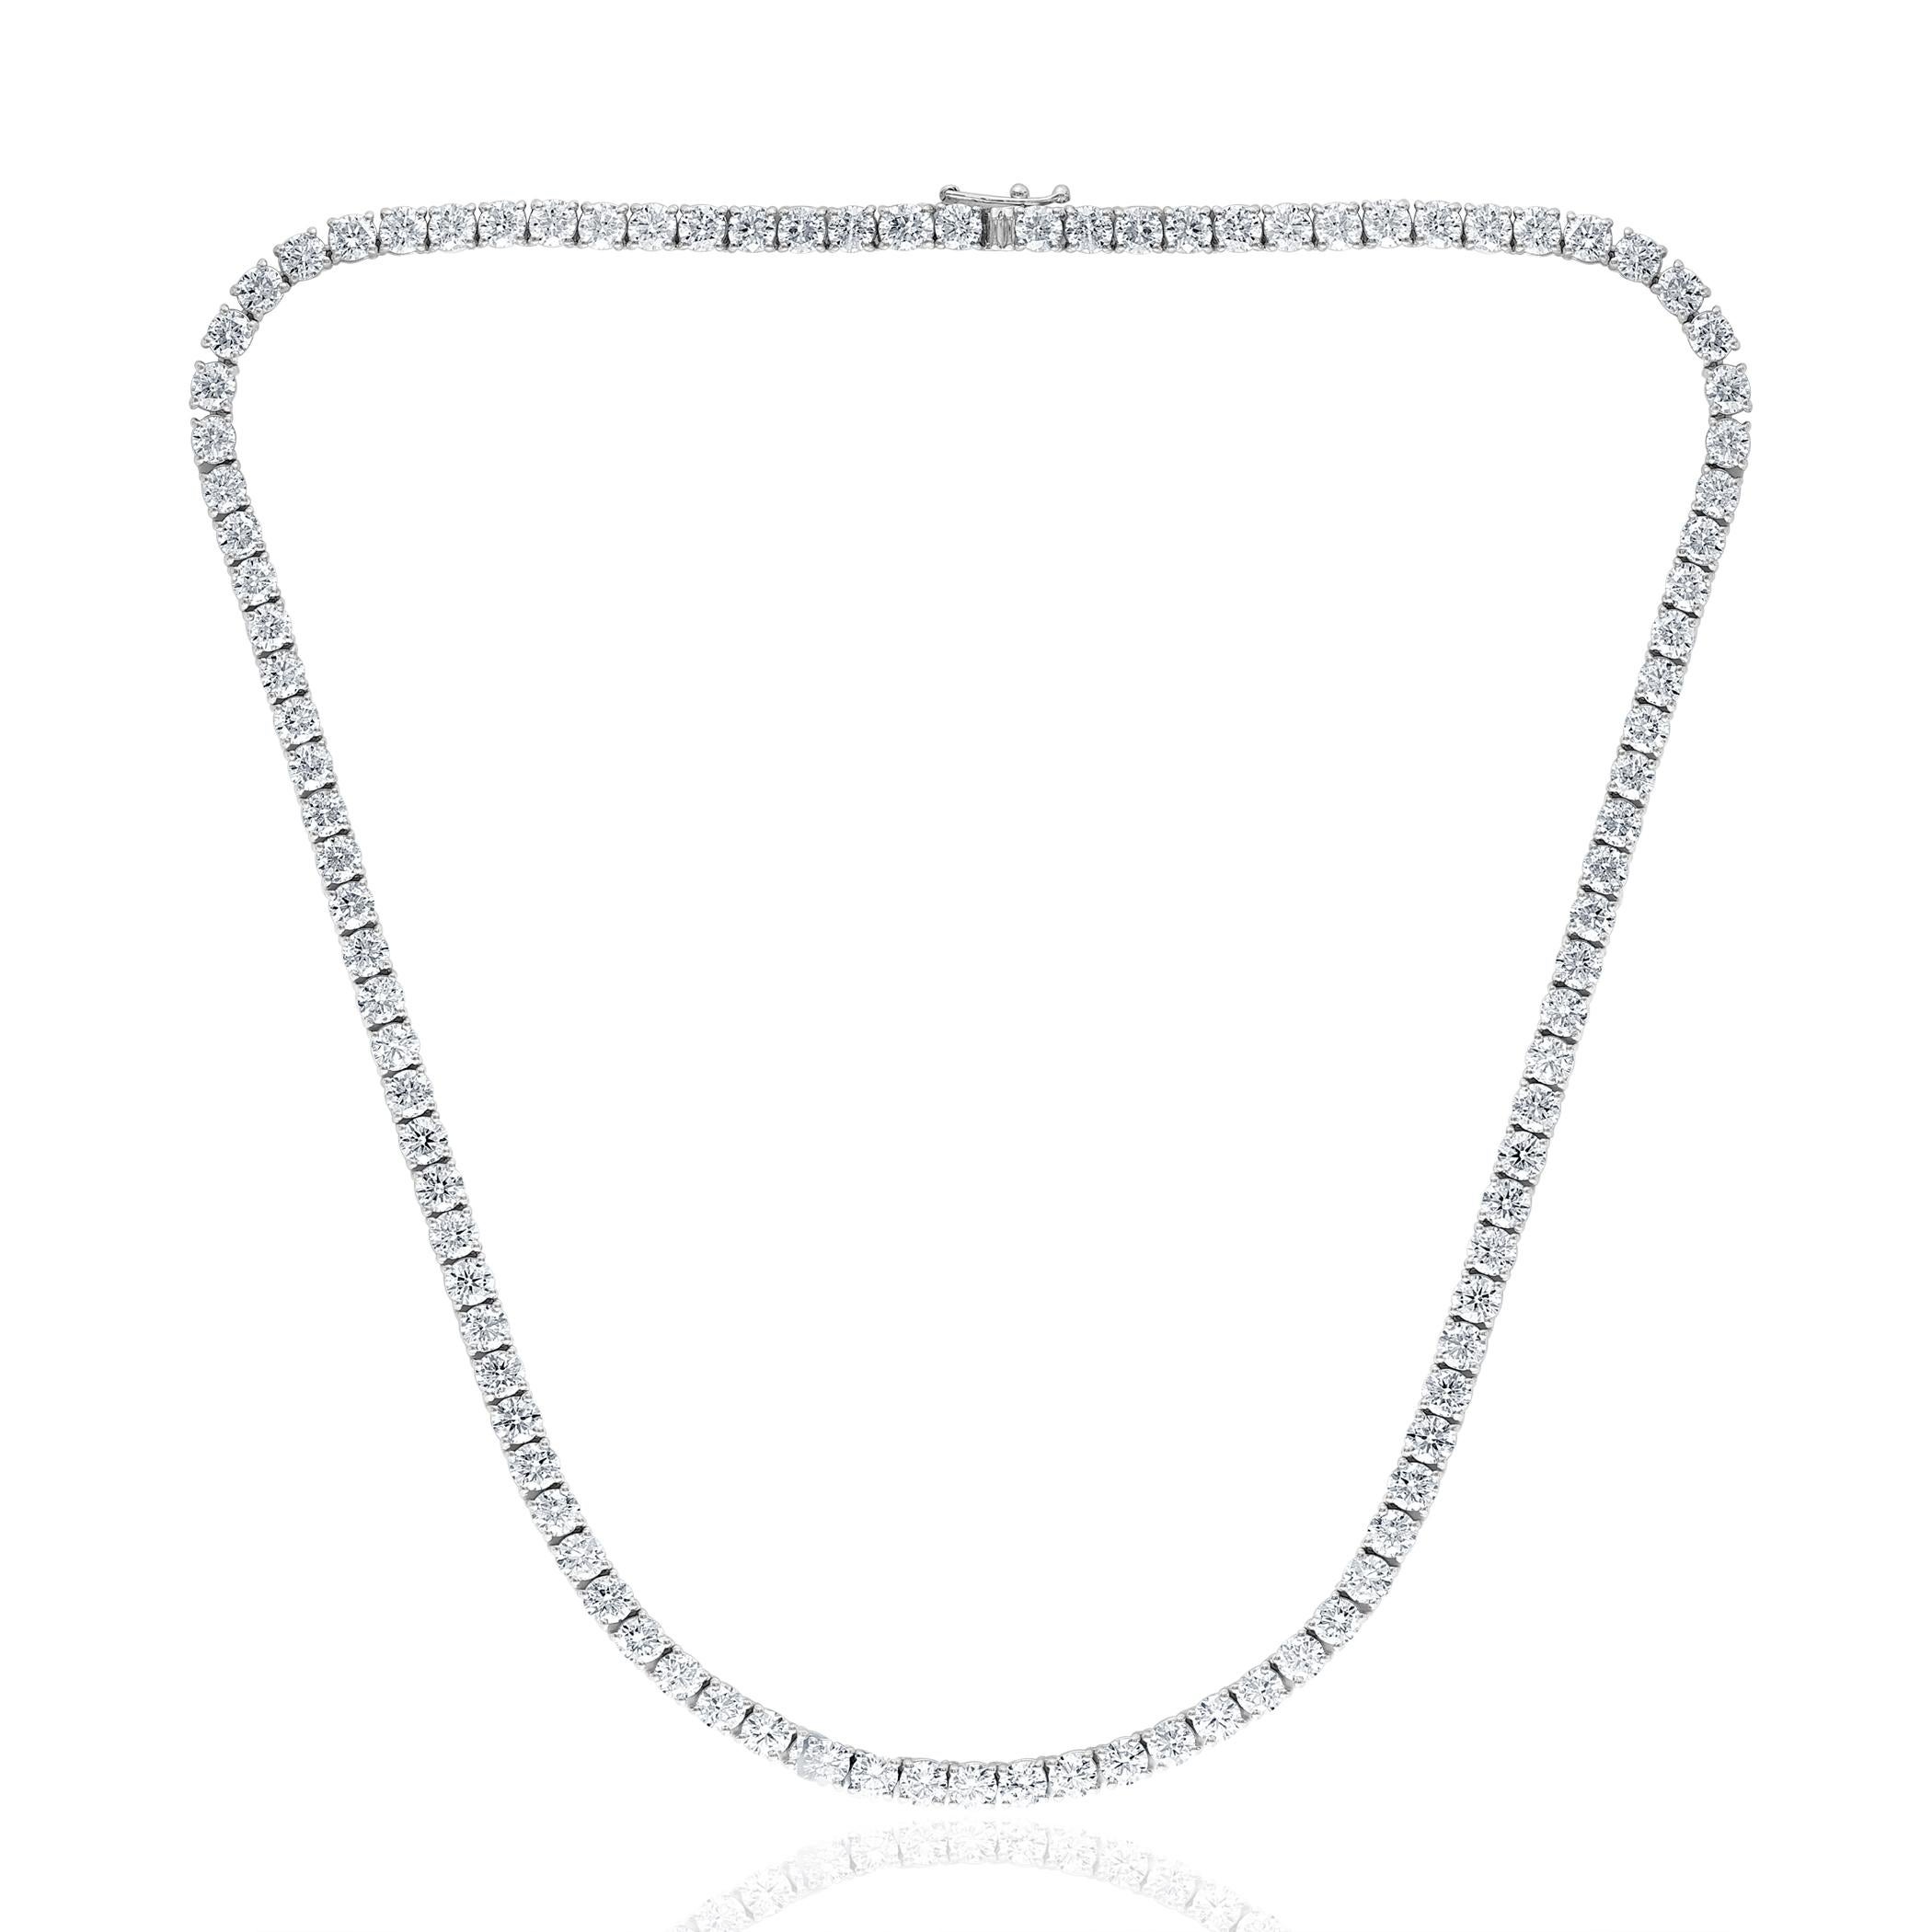 A brilliant and classic piece showcasing a line of round diamonds set in 14K White Gold. 103 diamonds in this necklace are brilliant round cut and weigh 25.03 carats in total. 16 inches in length.